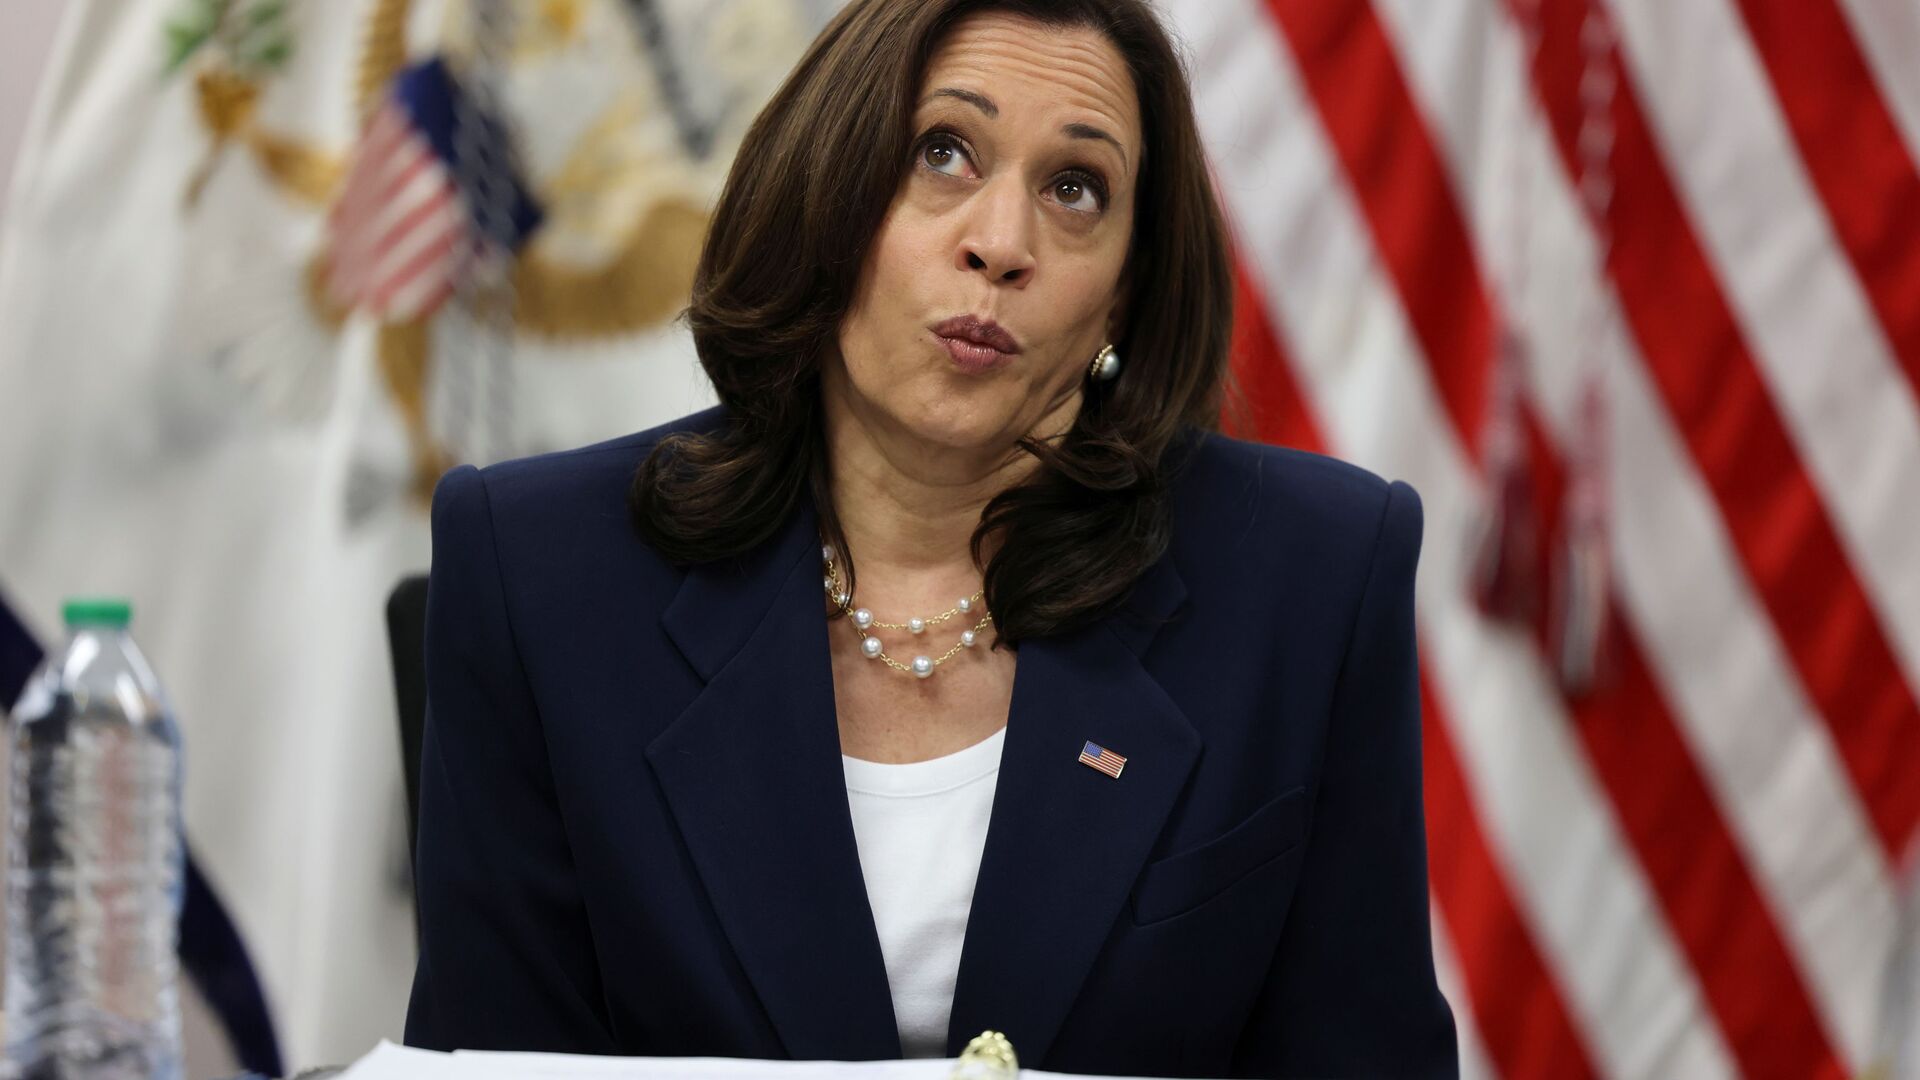 U.S. Vice President Kamala Harris takes part in a round table with faith and community leaders who are assisting with the processing of migrants seeking asylum, at Paso del Norte Port of Entry in El Paso, Texas, U.S., June 25, 2021 - Sputnik International, 1920, 01.07.2021